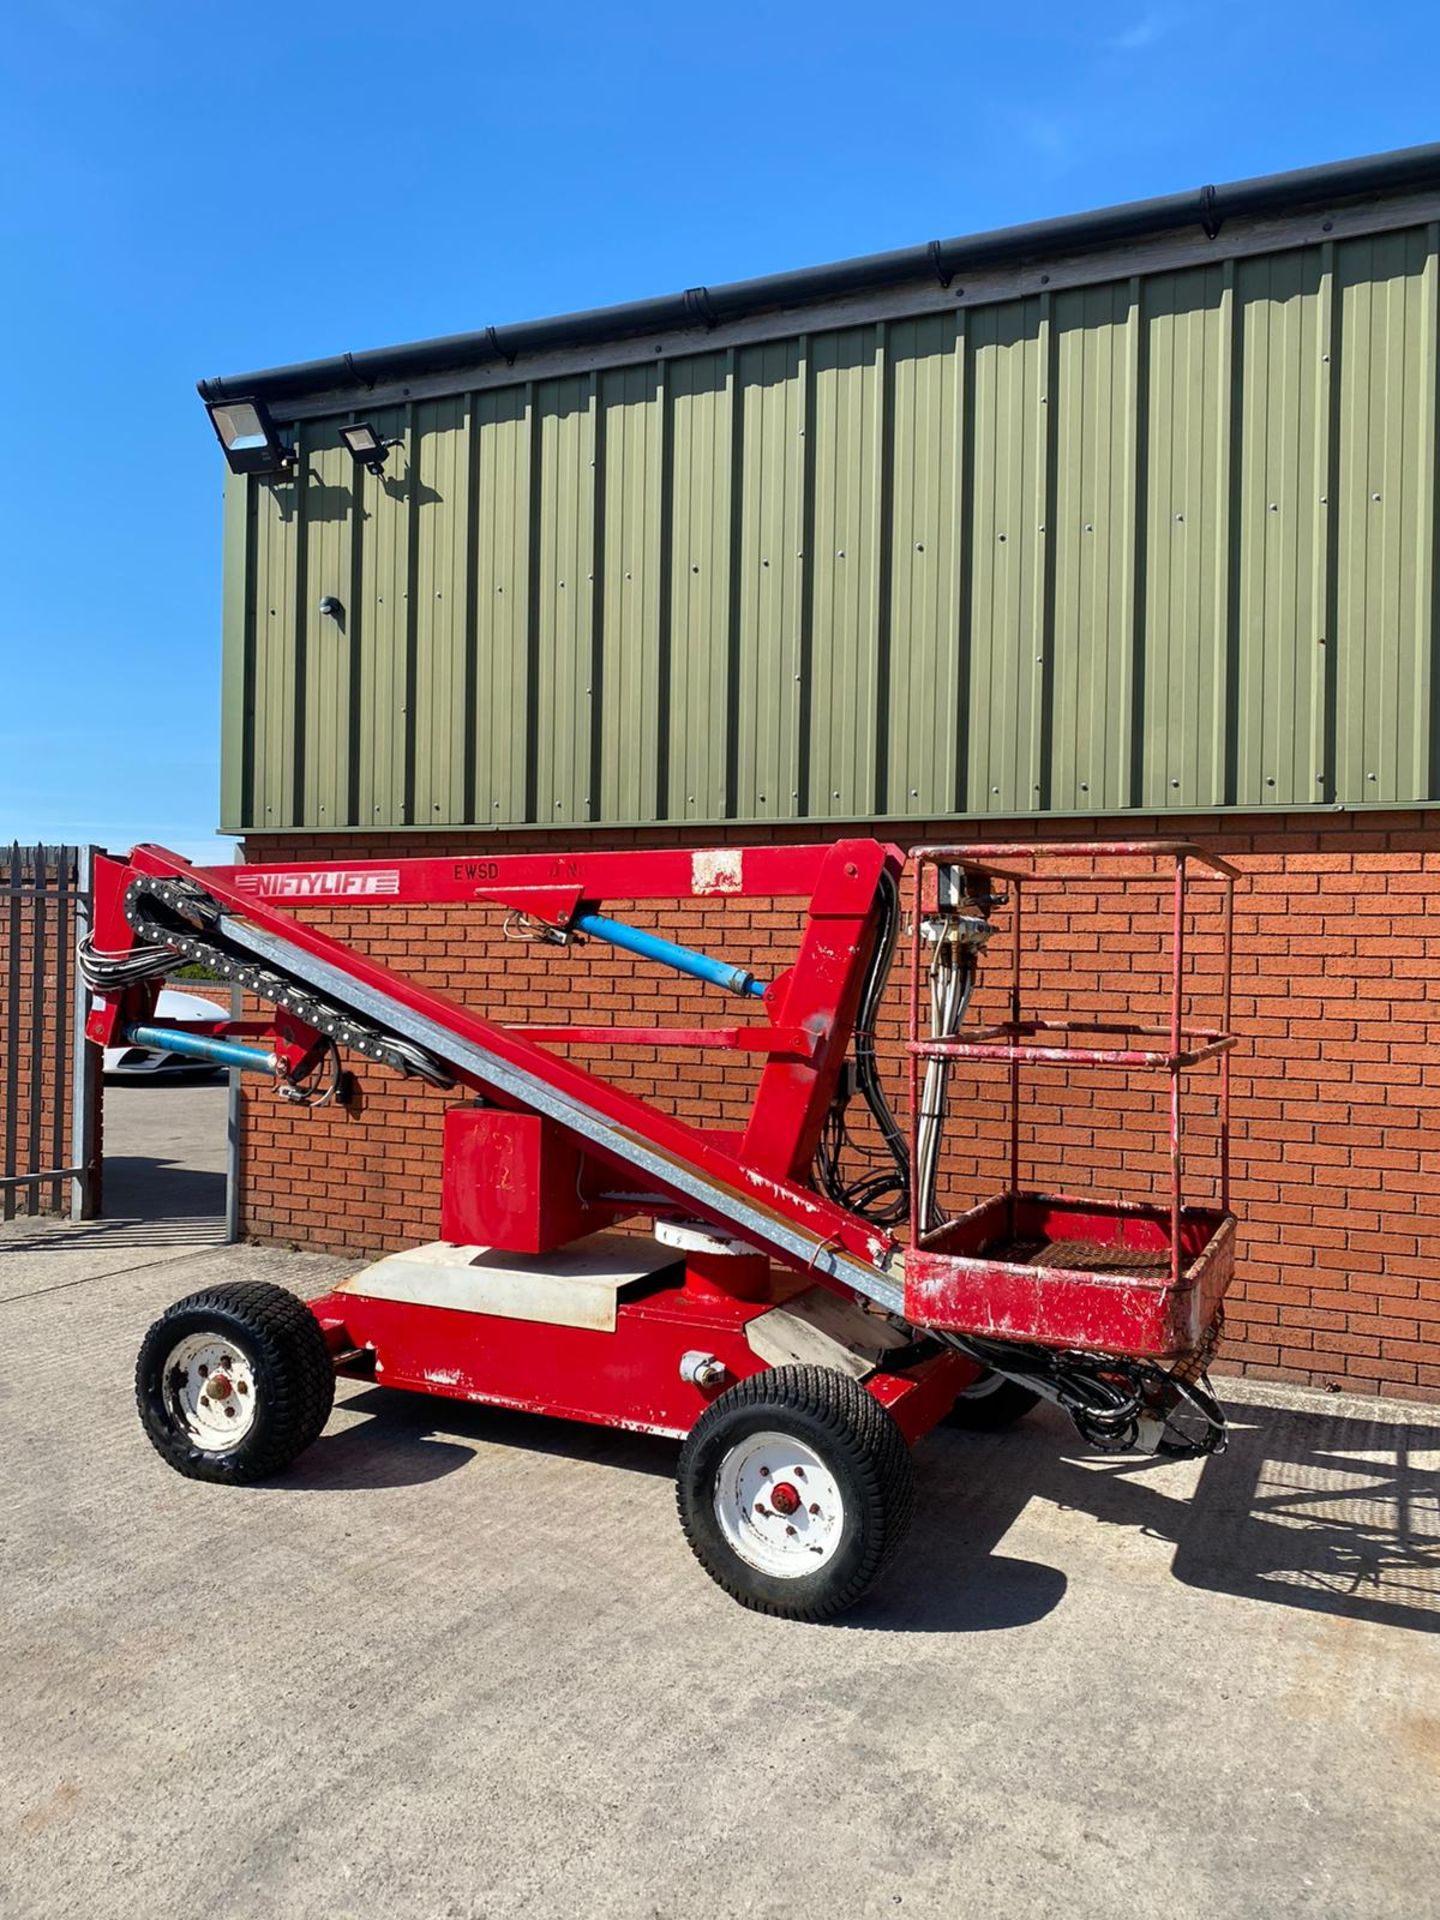 Niftylift HR12 E Electric Cherry Picker - Image 2 of 11